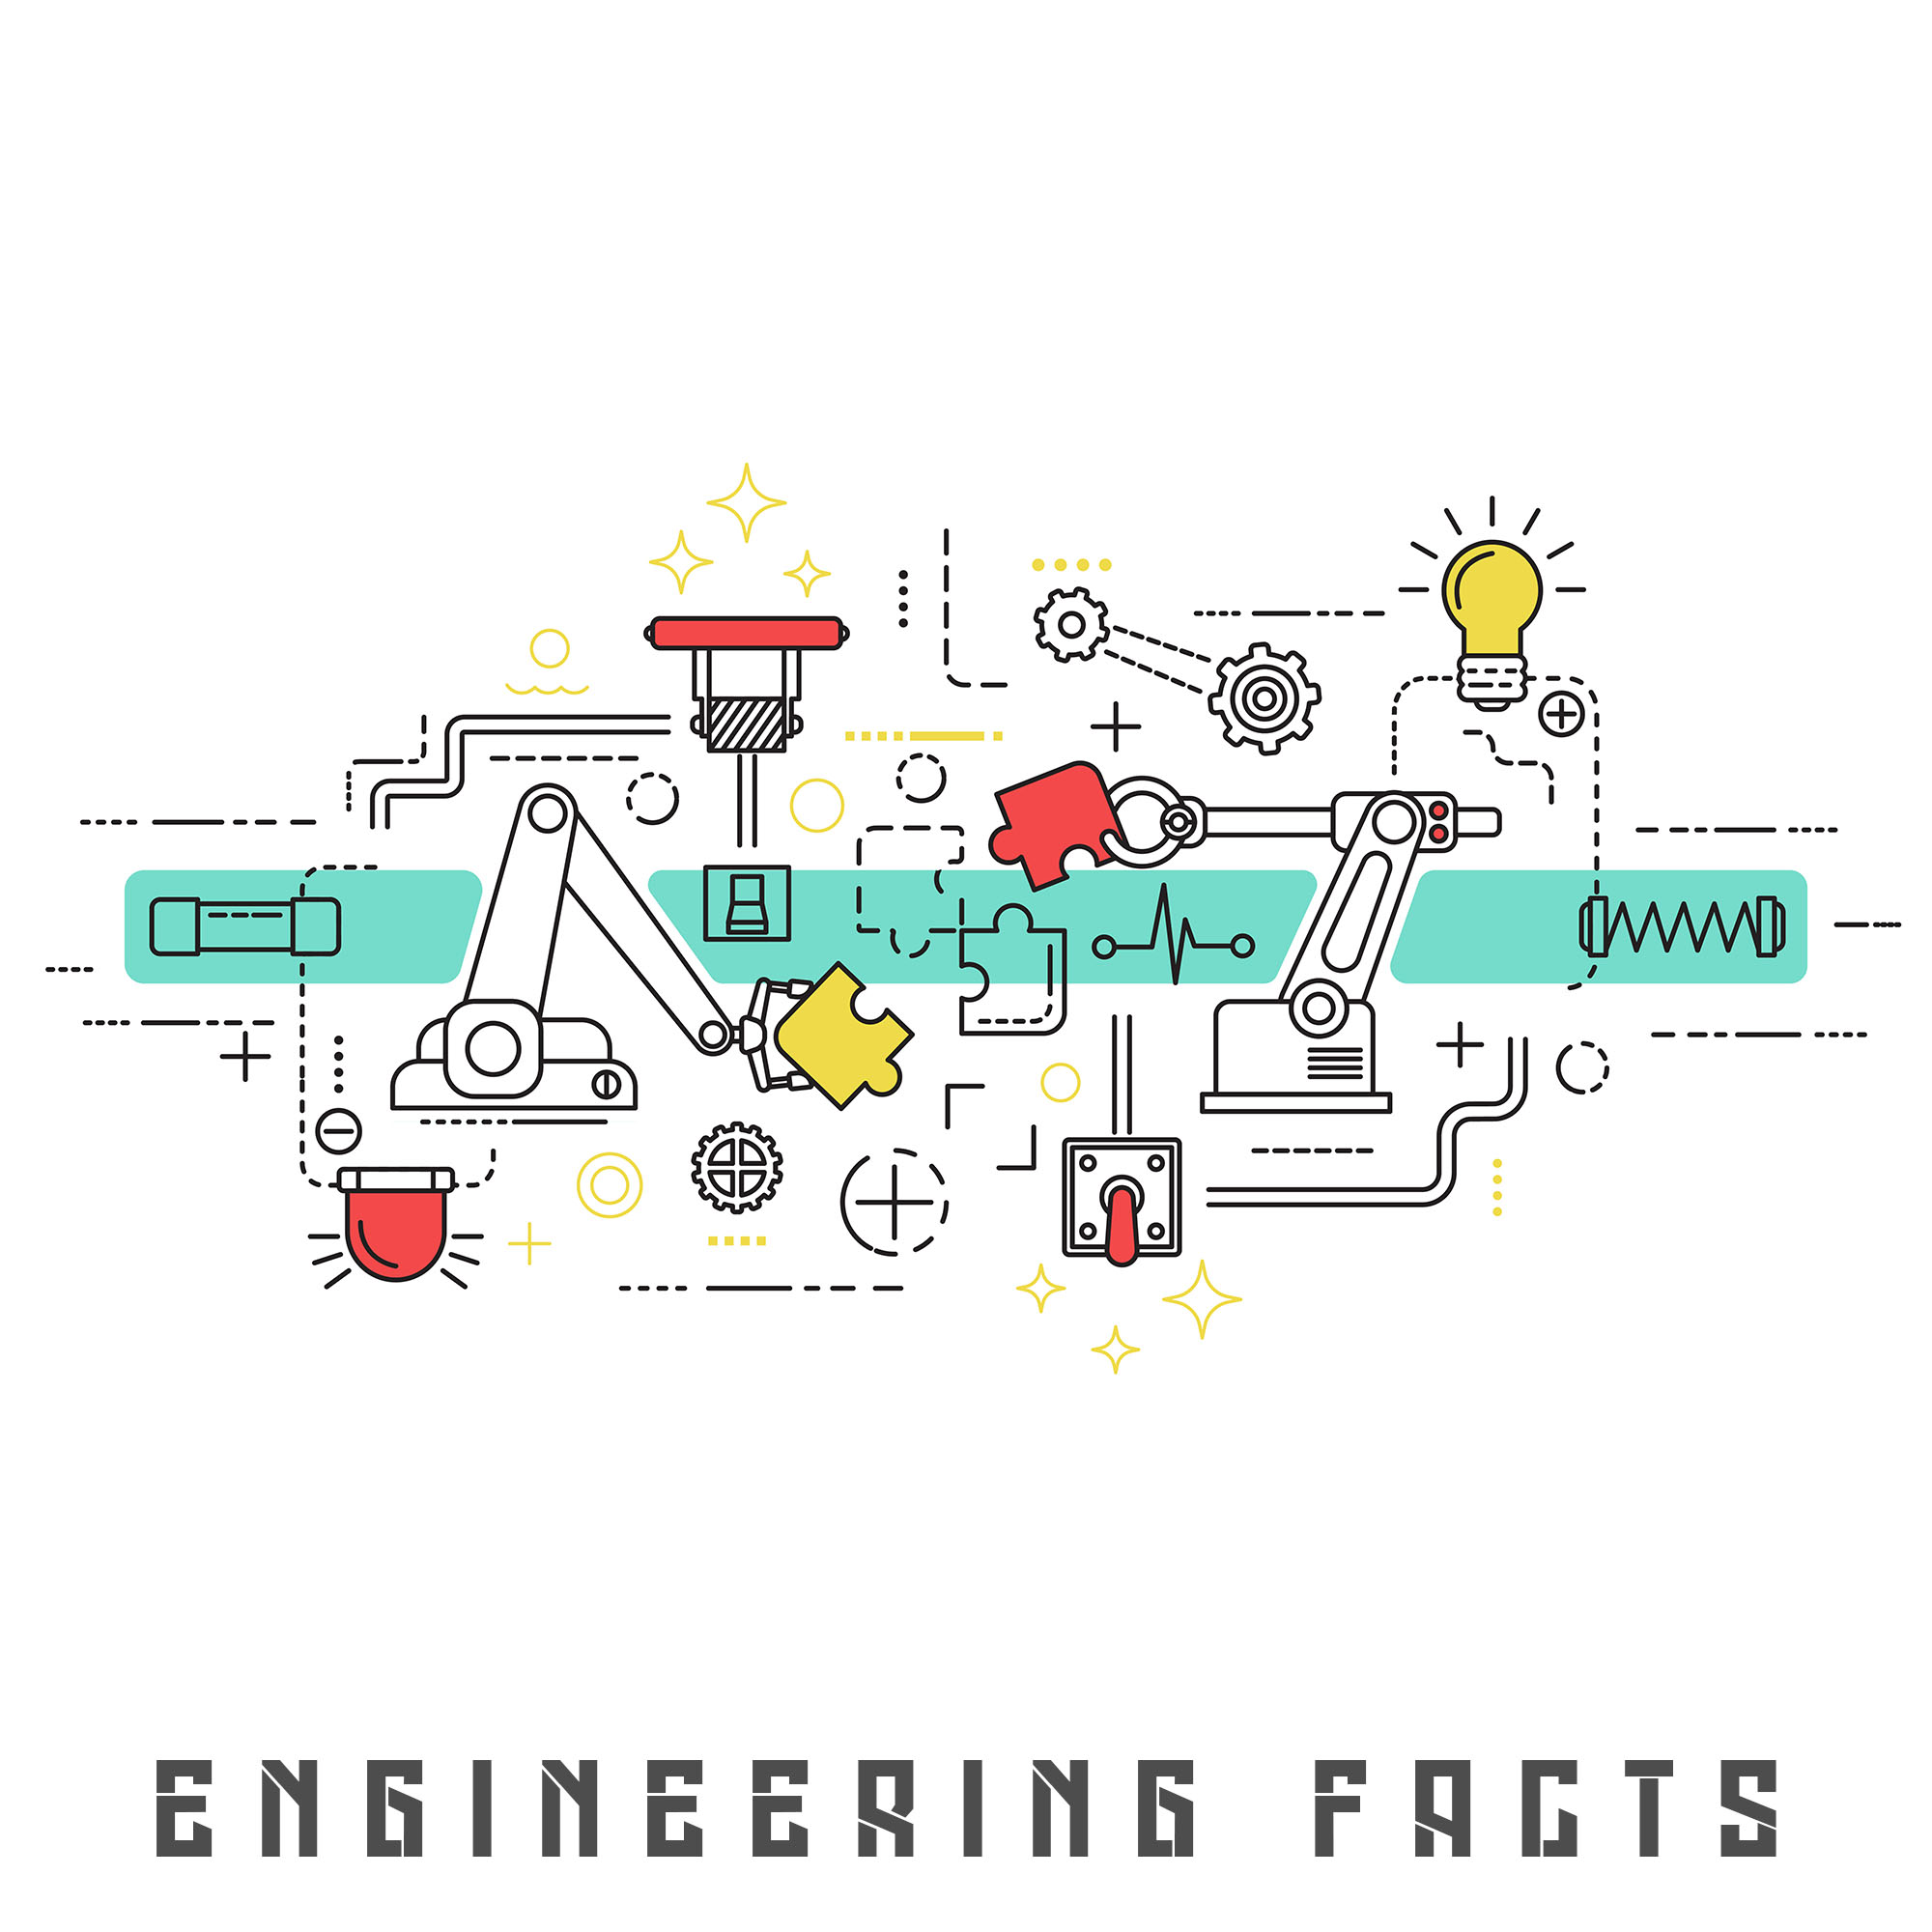 engineering facts